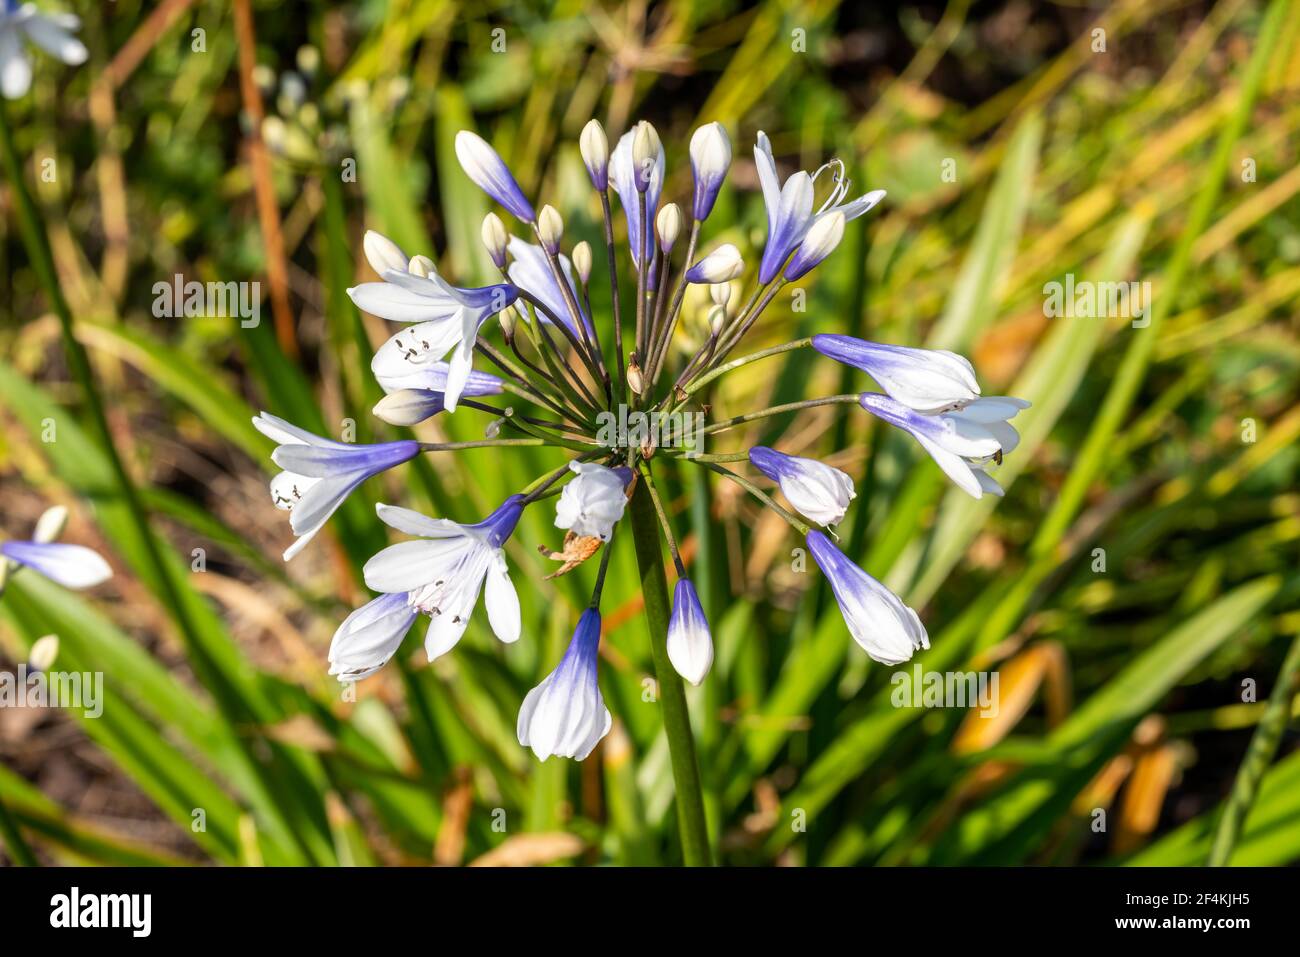 Agapanthus africanus 'Twister' a summer flowering plant with blue white springtime flower commonly known as African lily, stock photo image Stock Photo